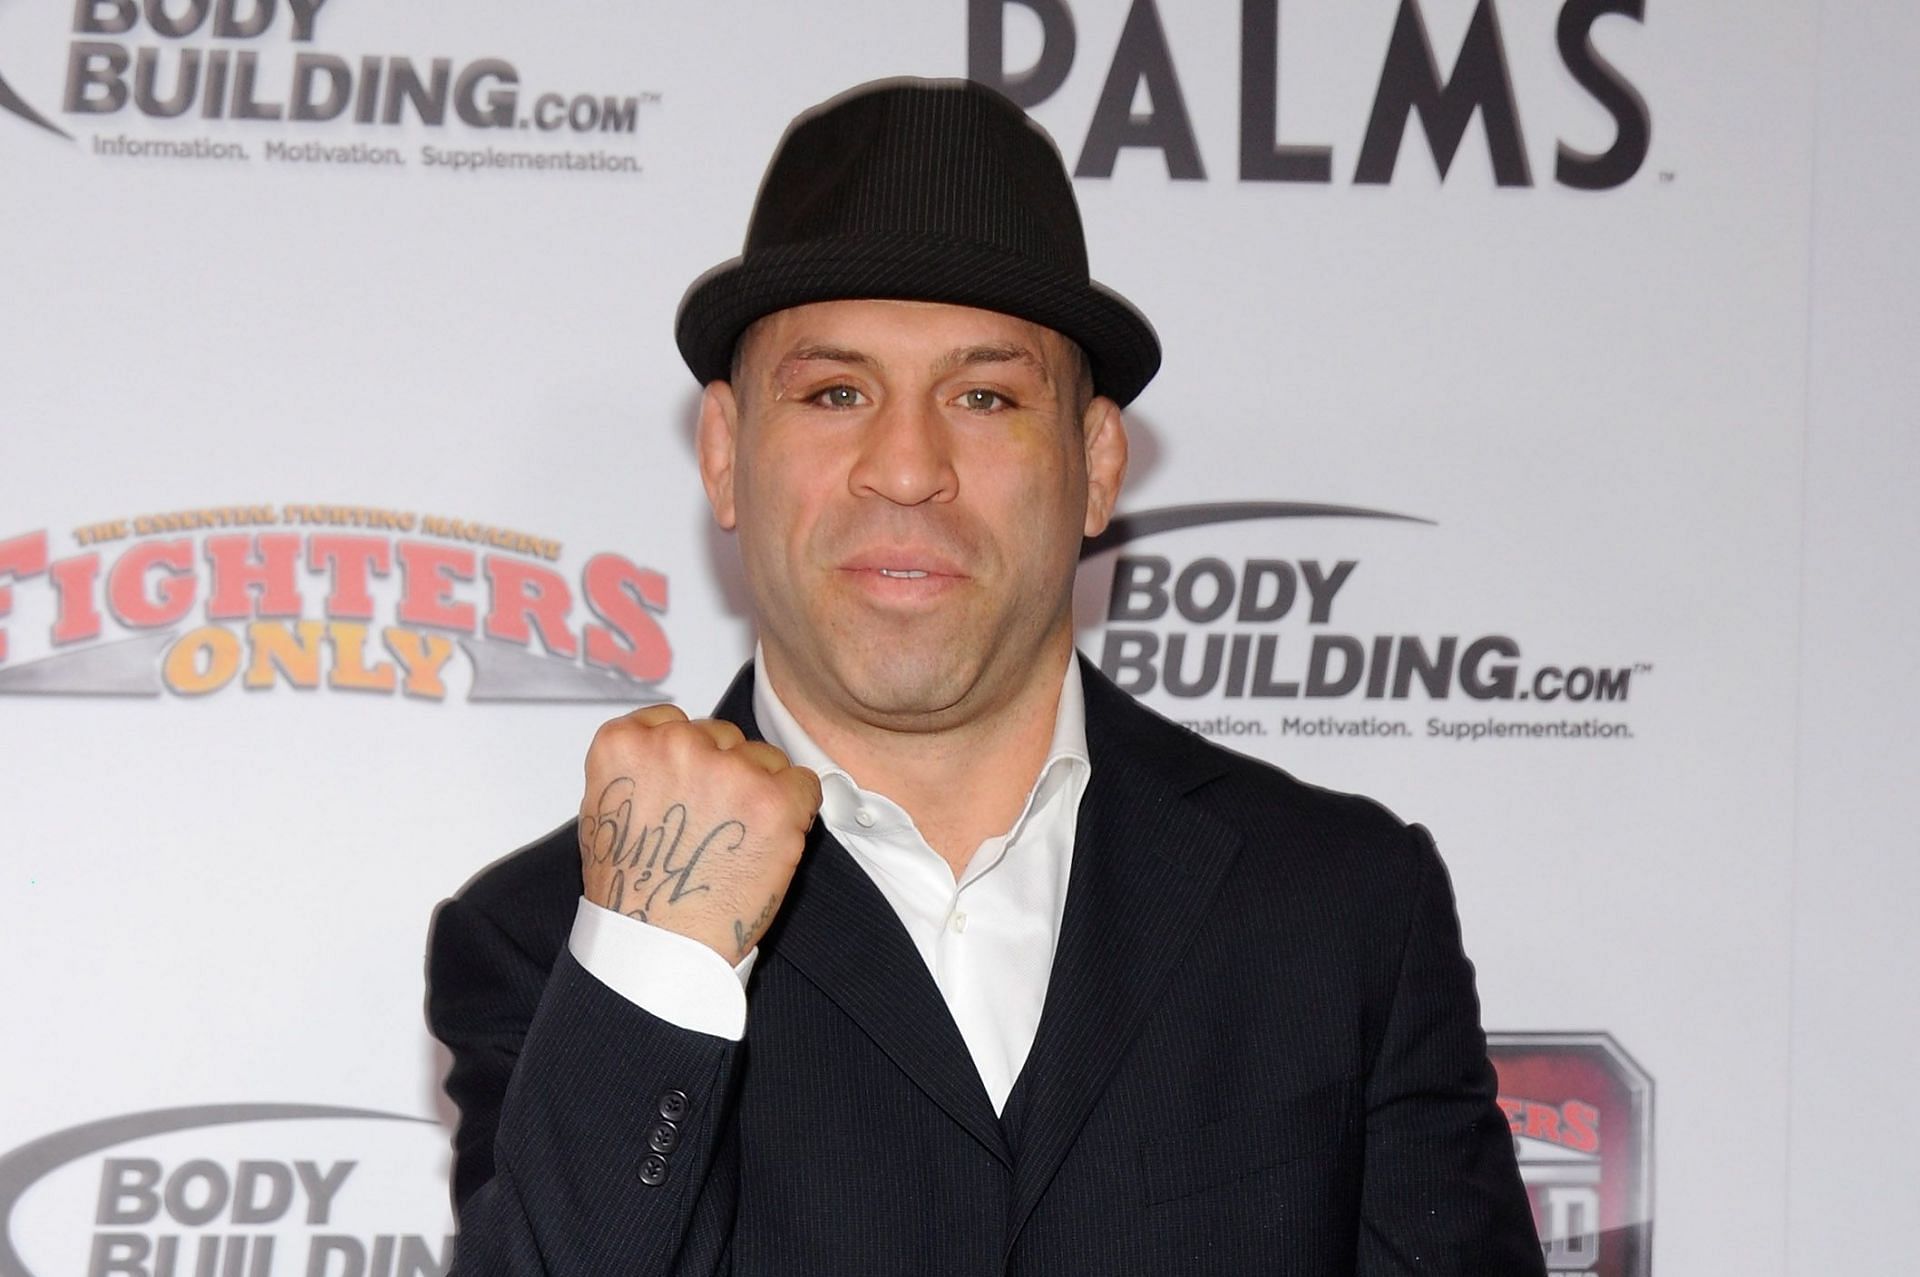 Wanderlei Silva is recognised as one of the best 205lbers of all time